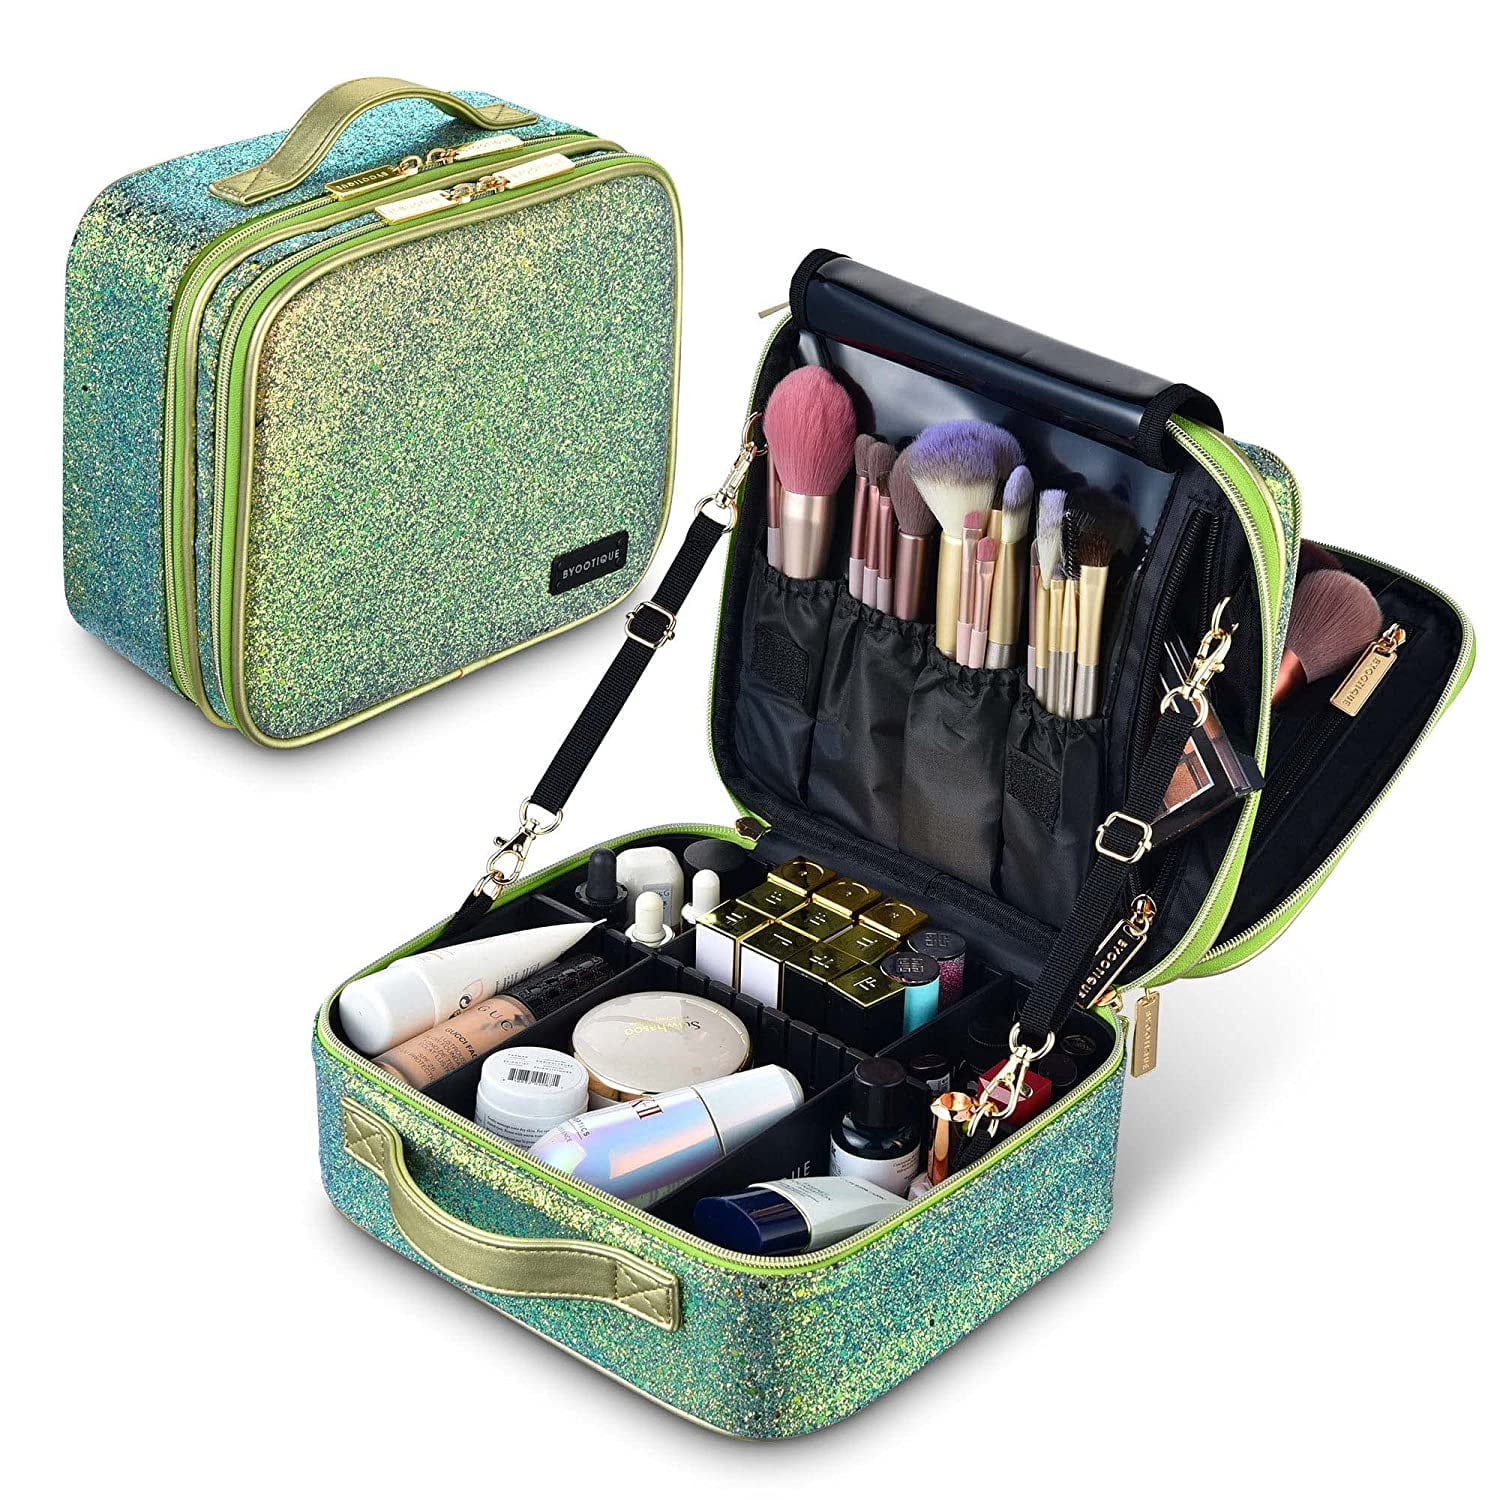 Claire's Features - Caboodles Makeup Case Large On the Go Girl - Travel  Cosmetic Organizer with Mirror - Lavender & Blue with Glitter Gold Handle:  13